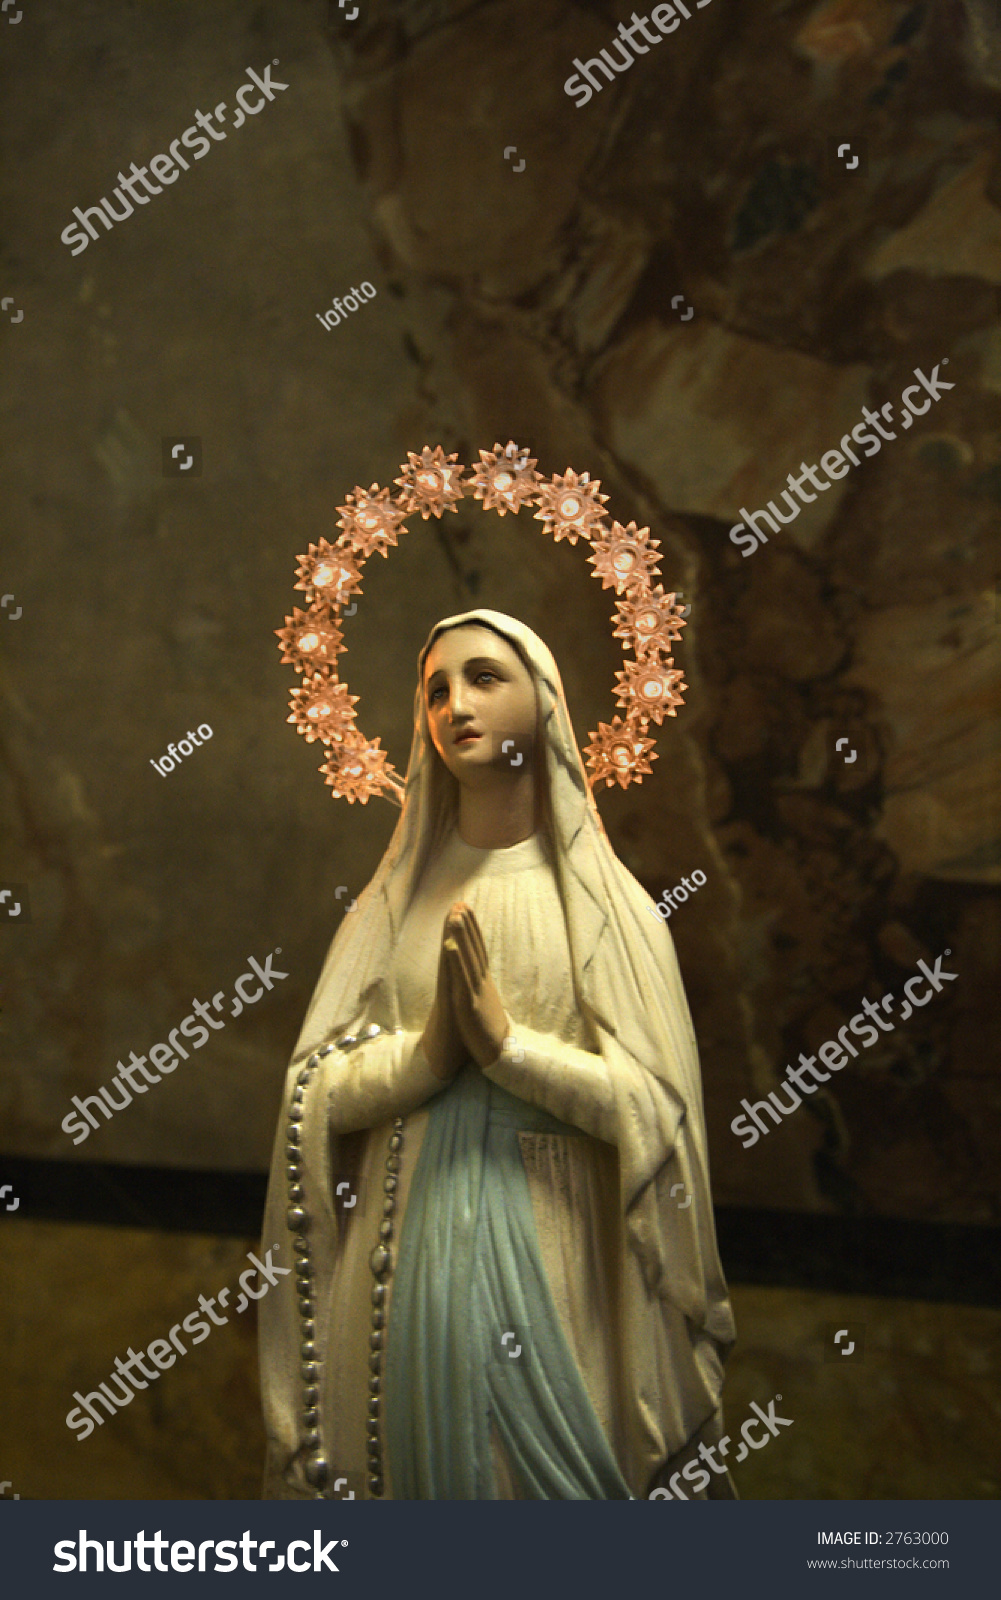 Statue Of Virgin Mary In Rome, Italy. Stock Photo 2763000 : Shutterstock